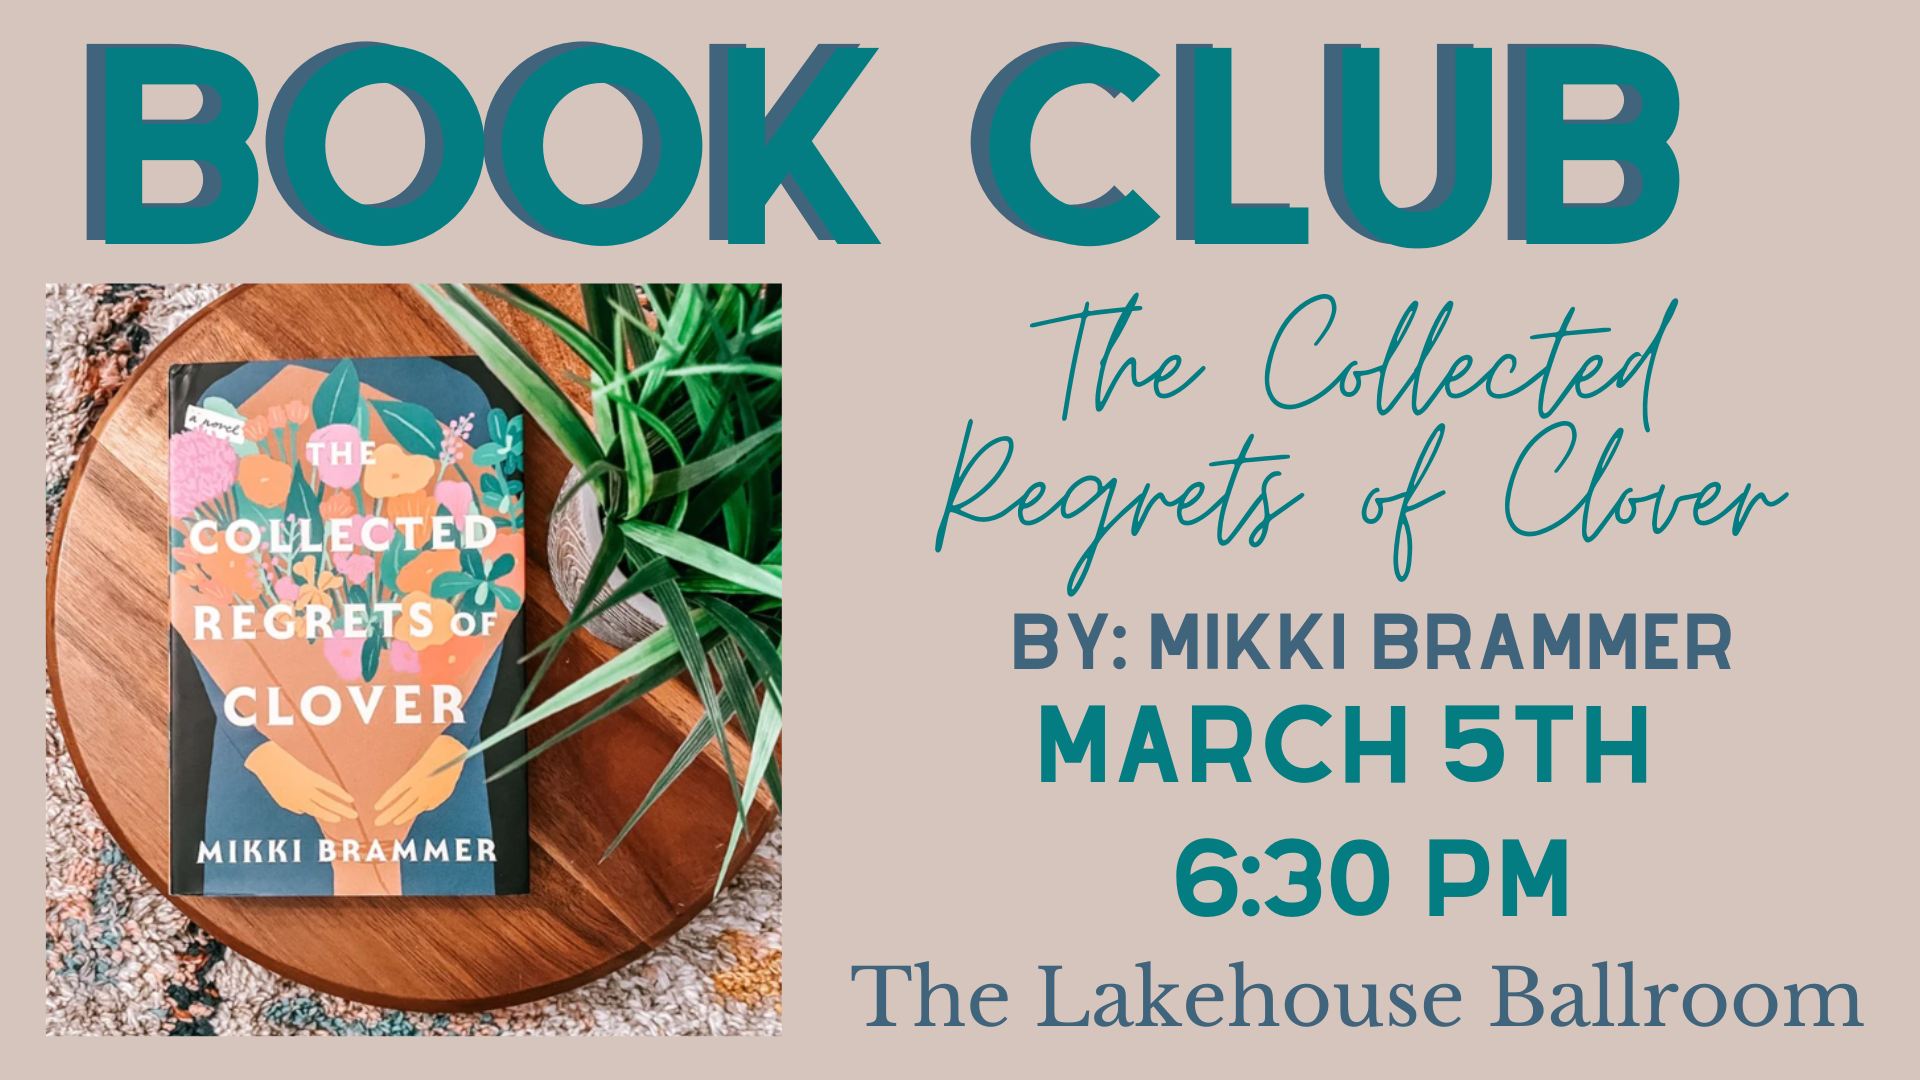 Towne Lake Book Club Set for March 5